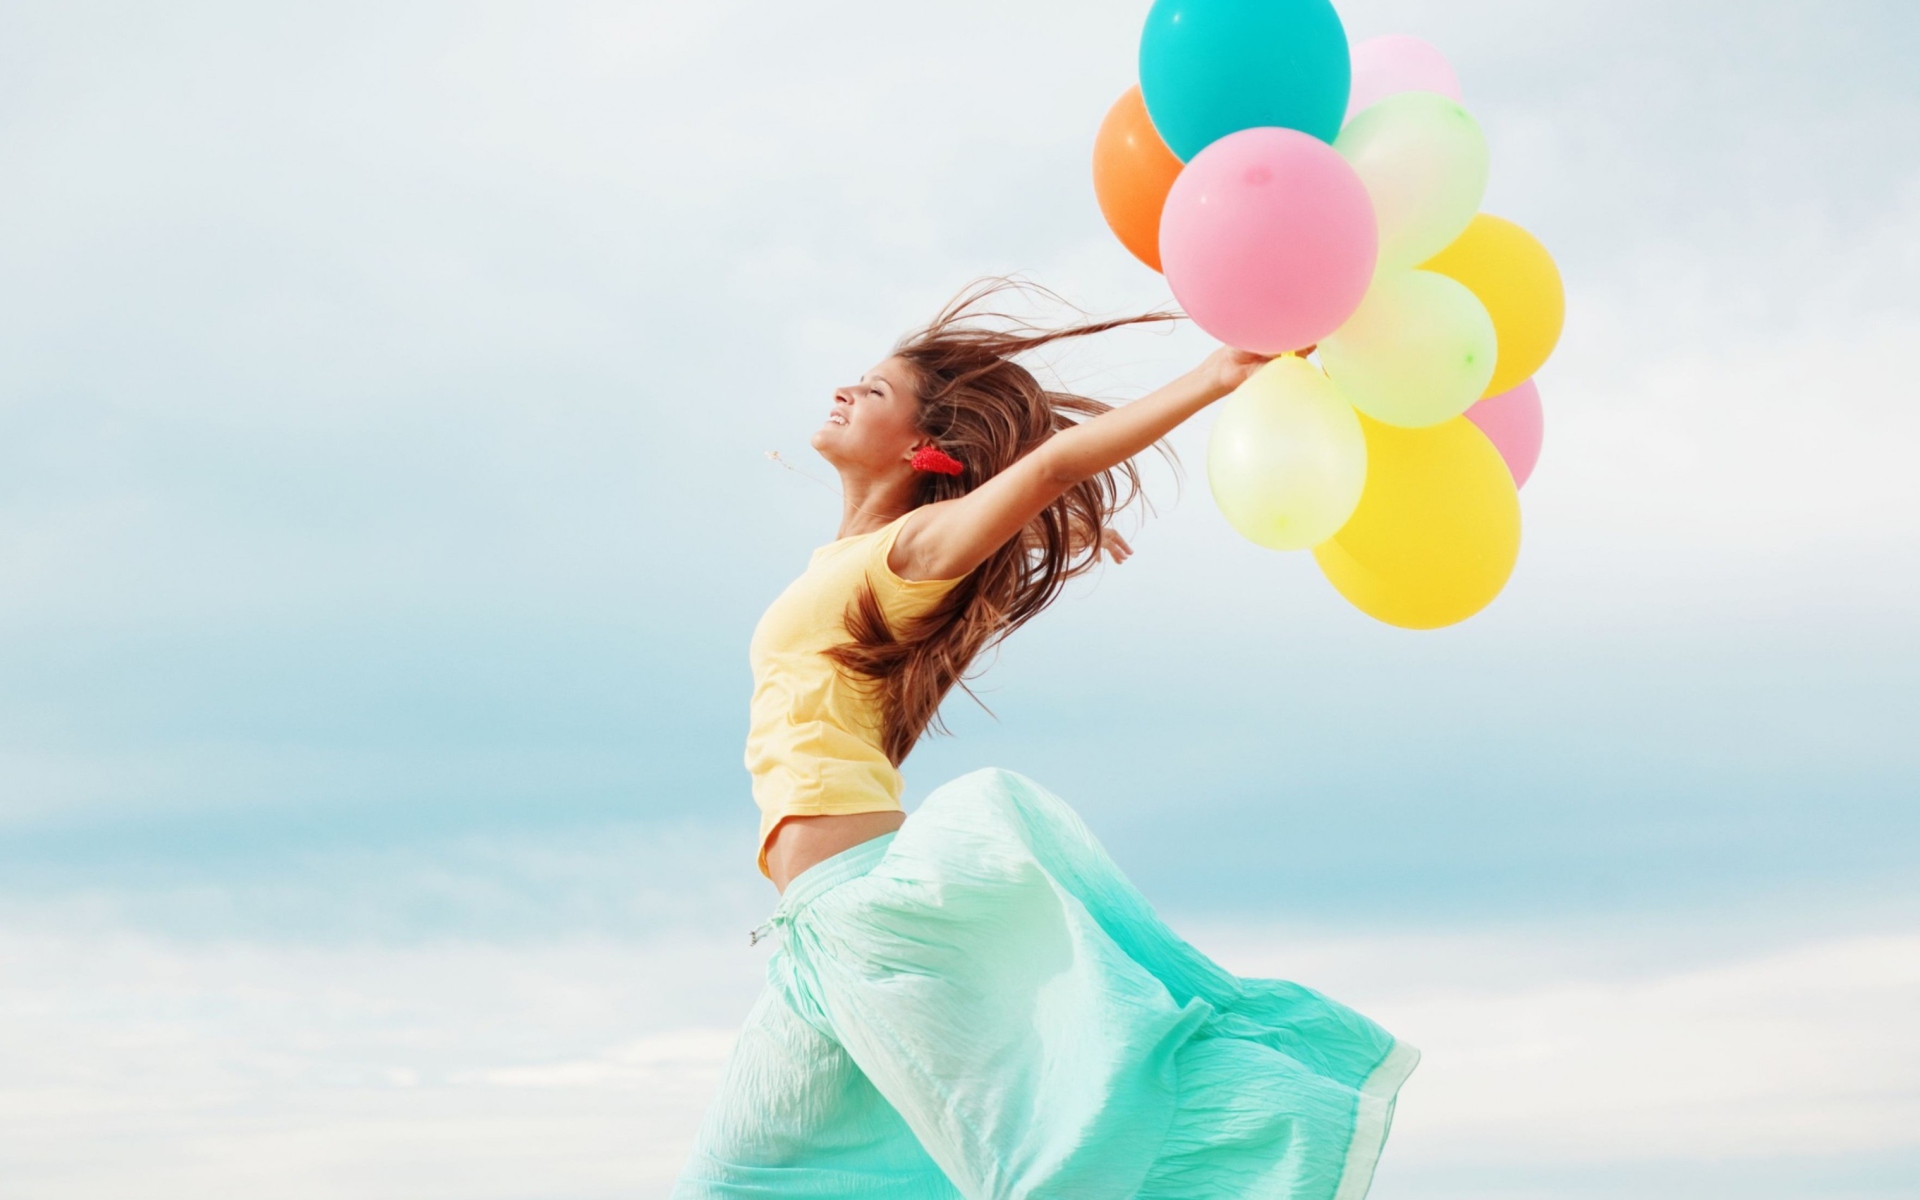 Girl With Colorful Balloons wallpaper 1920x1200